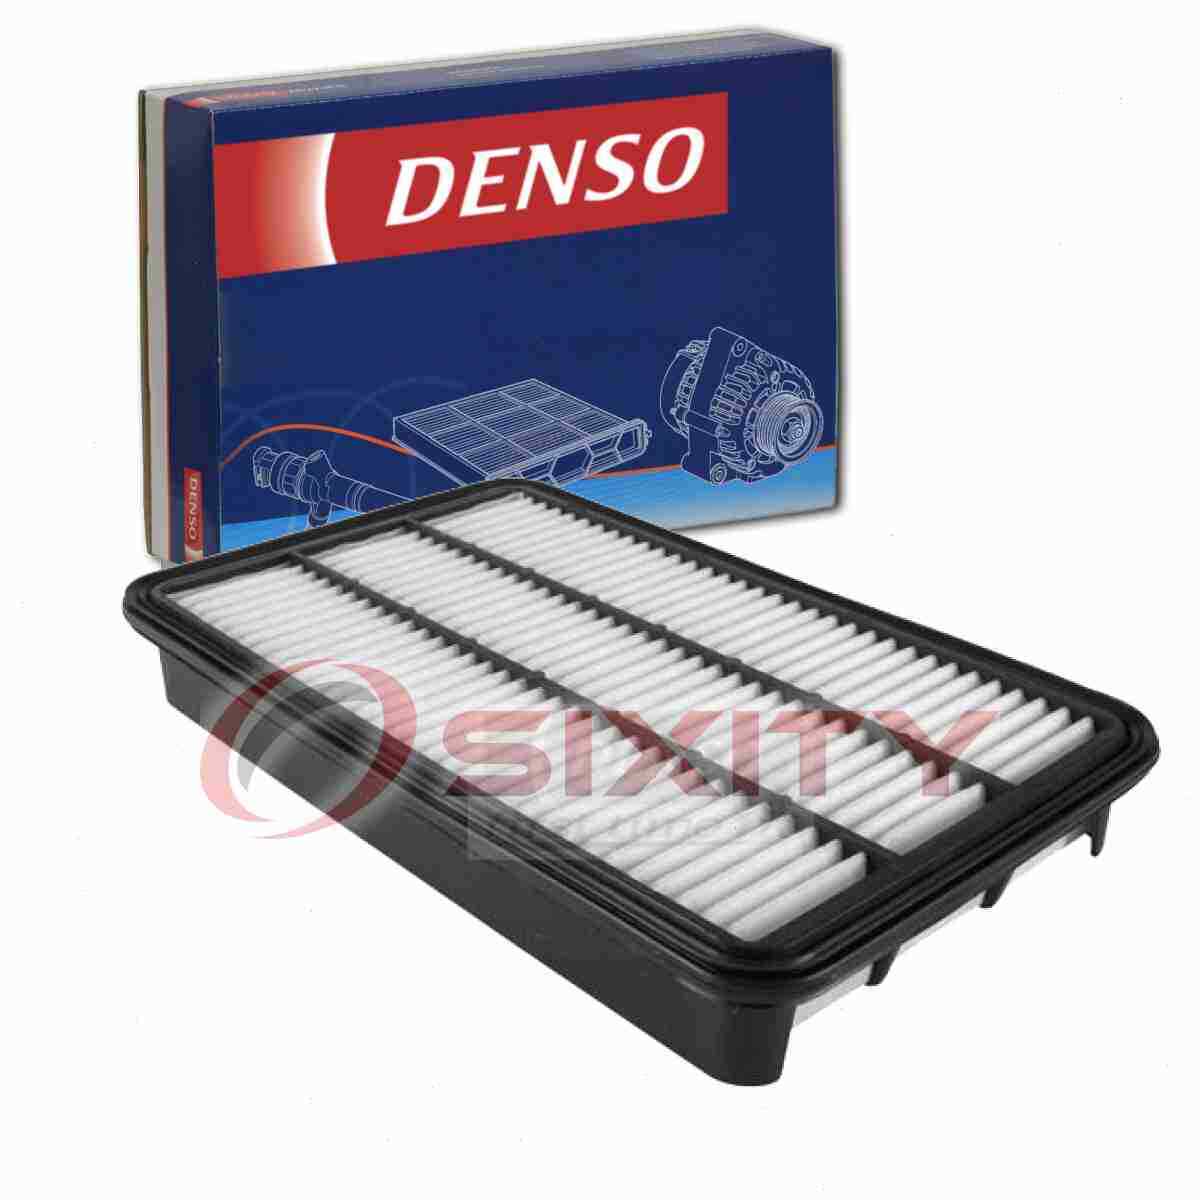 DENSO 143-3041 Air Filter for CA7351 A24690 46017 17801-74060 17801-03010 tf